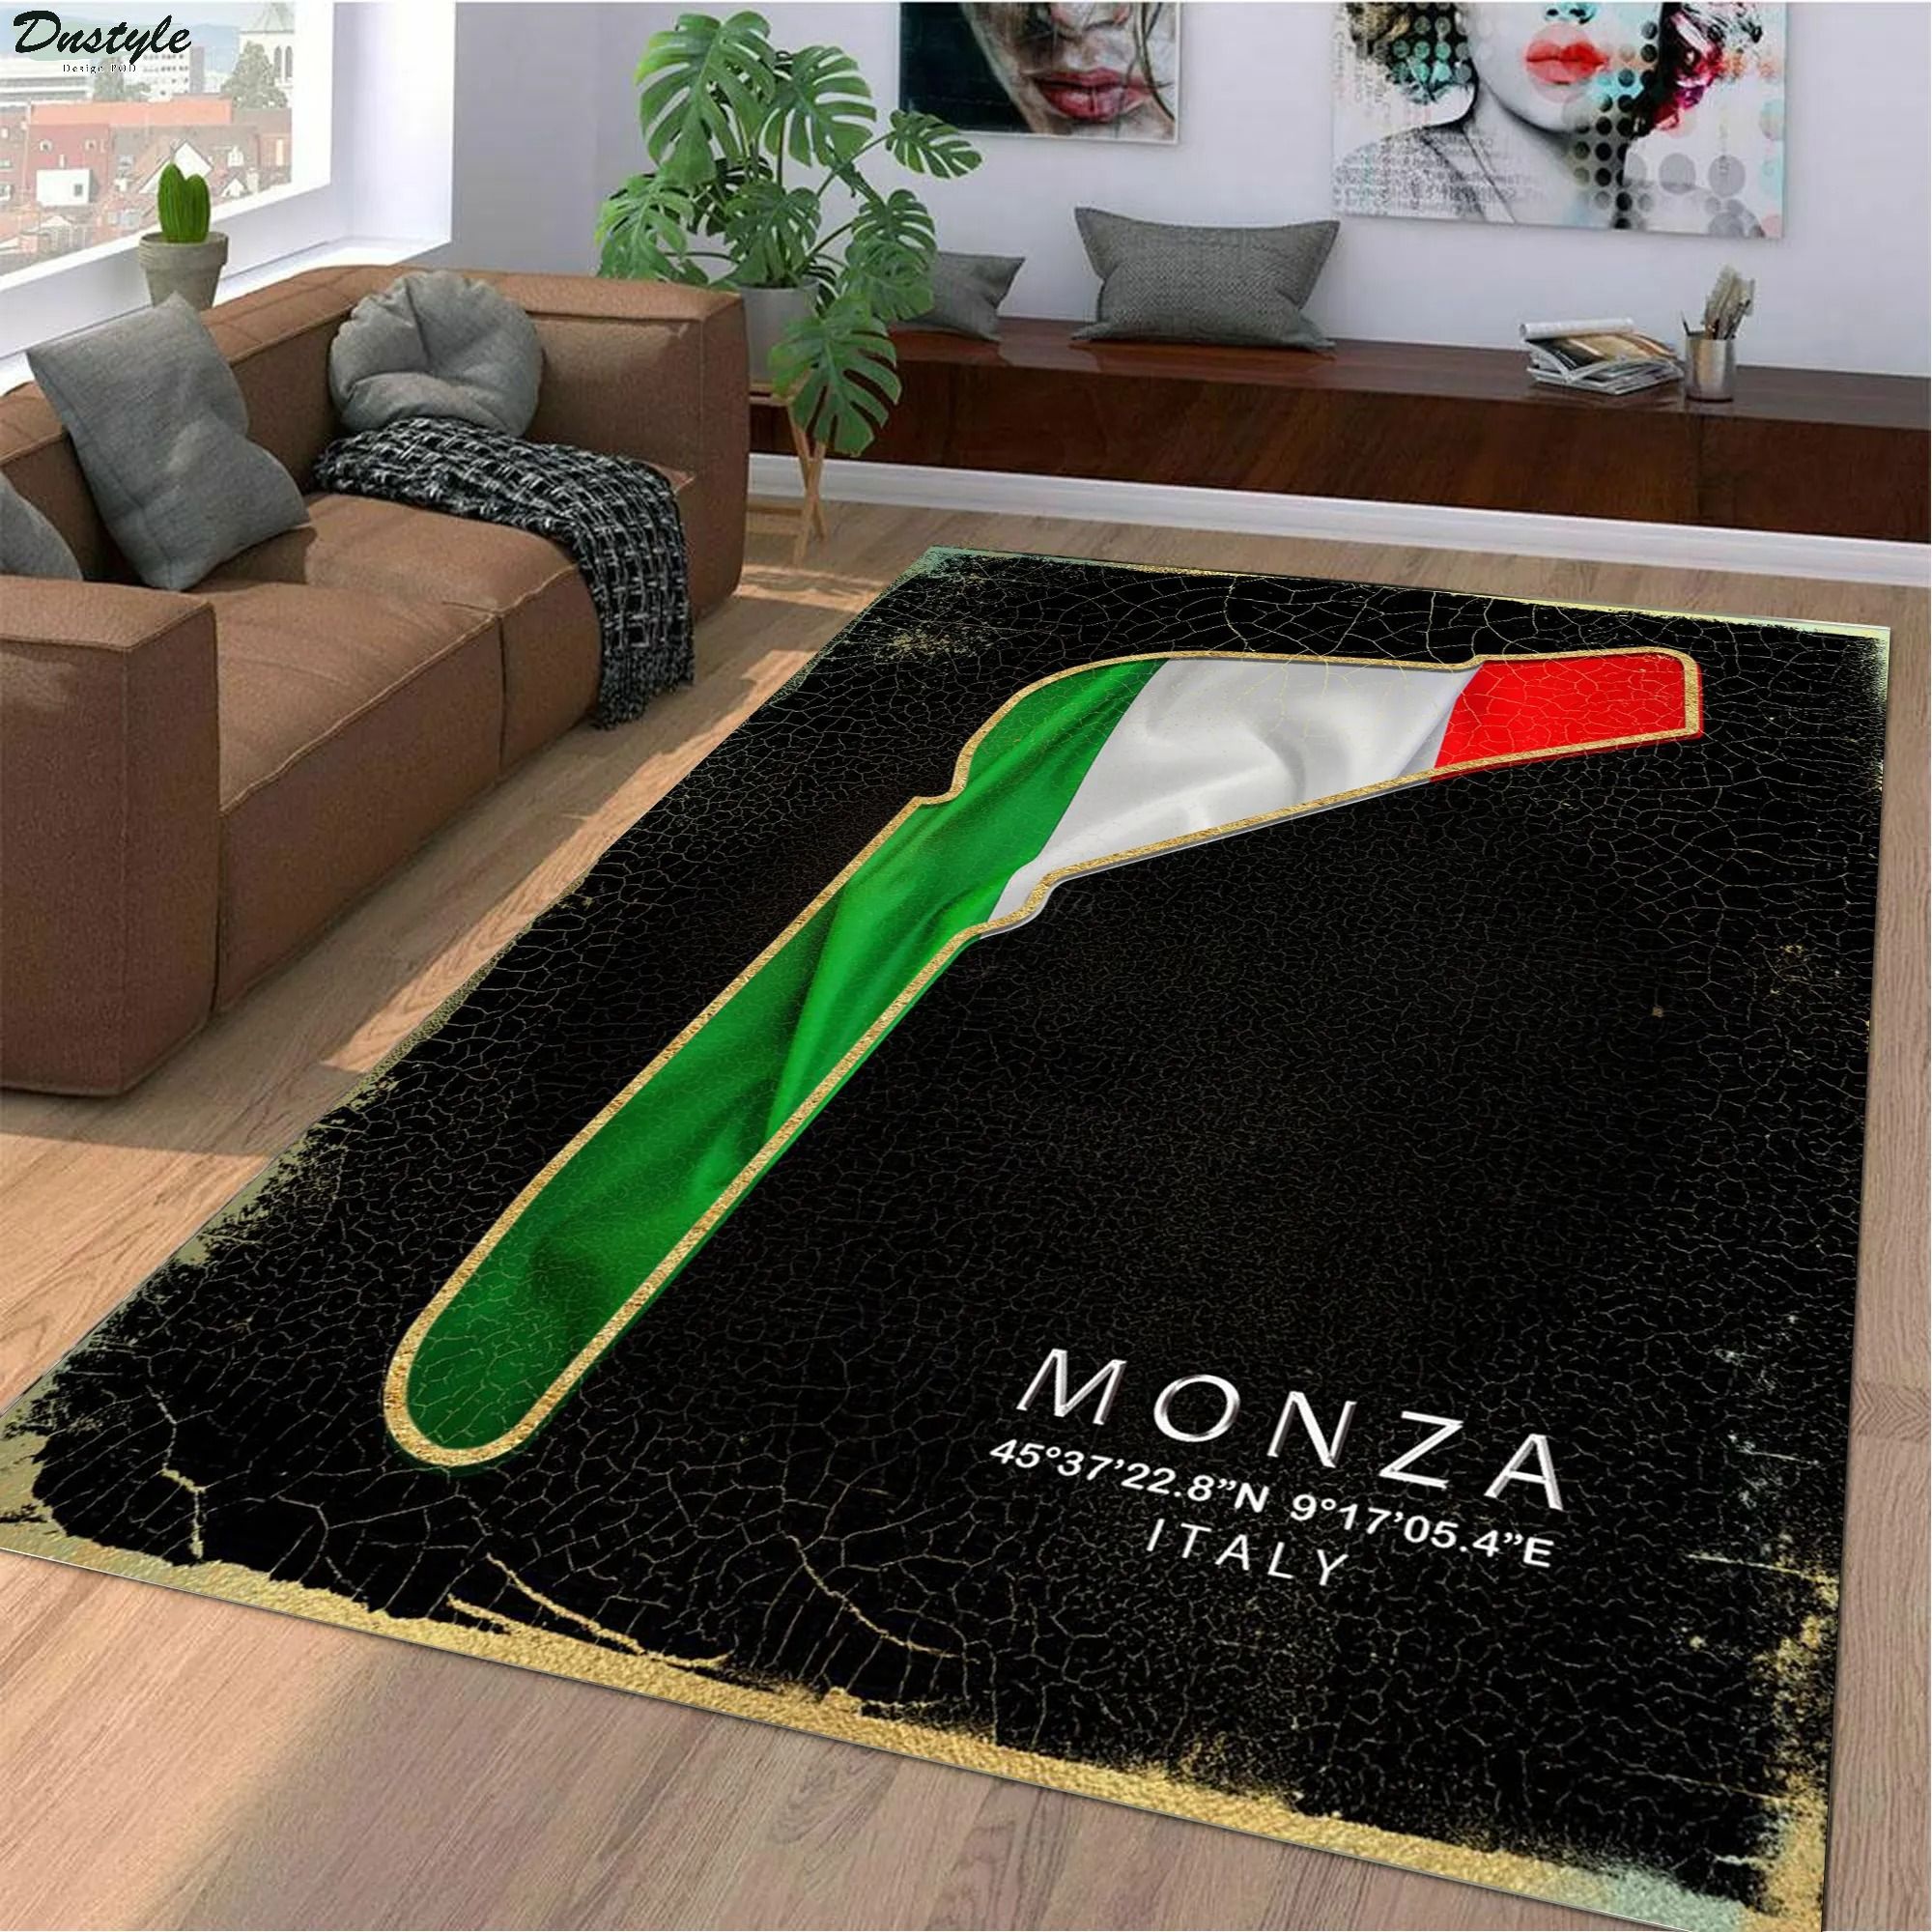 Monza italy f1 track rug